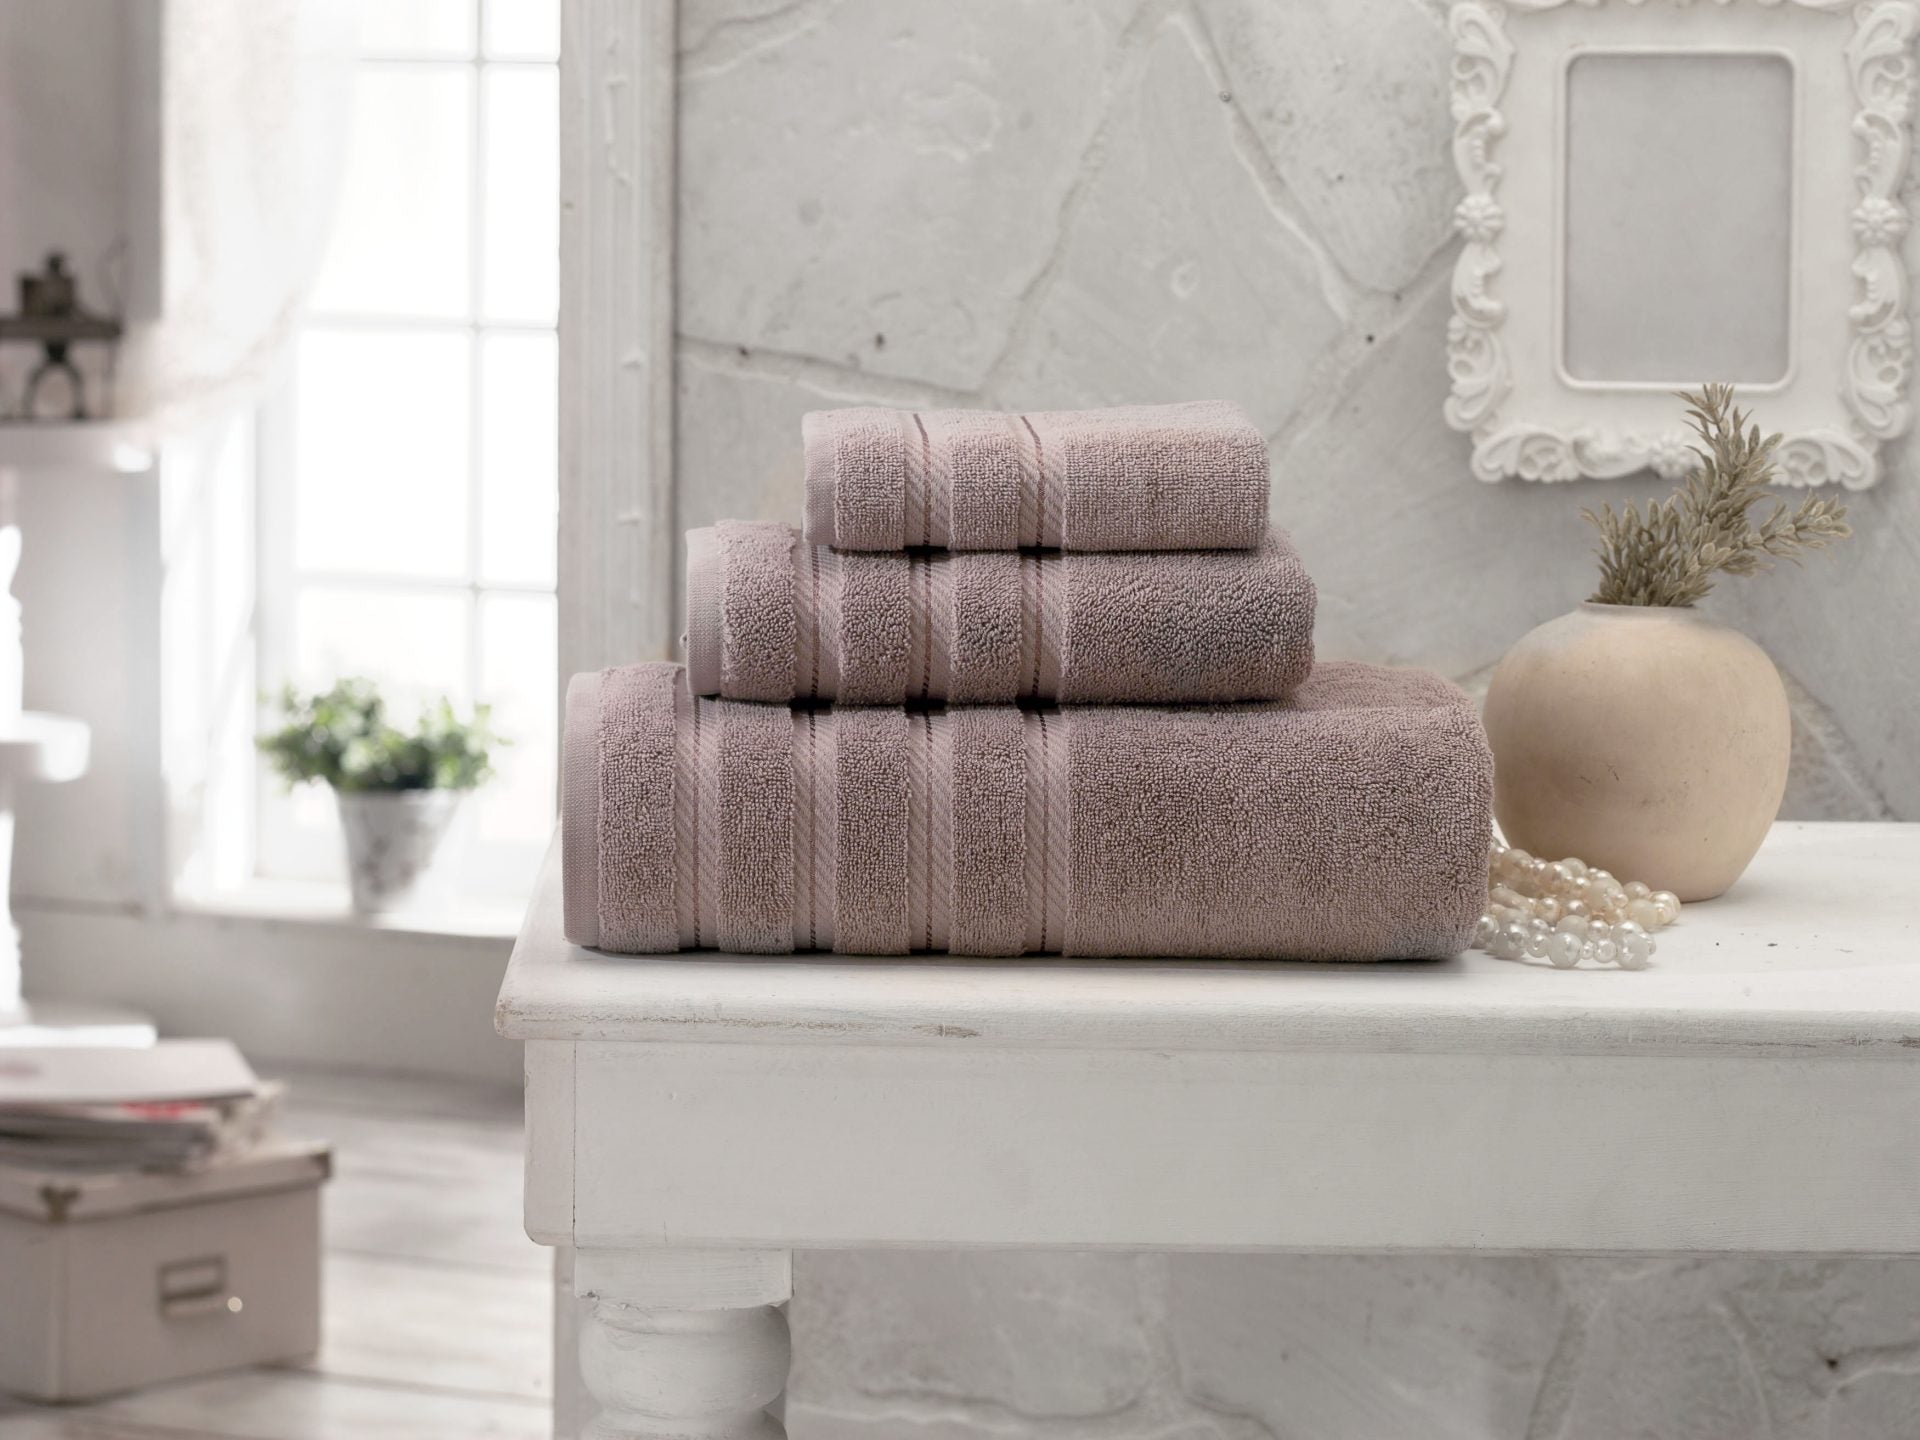 Experience the softness of our Turkish hand towels for yourself and feel like a celebrity all day long!